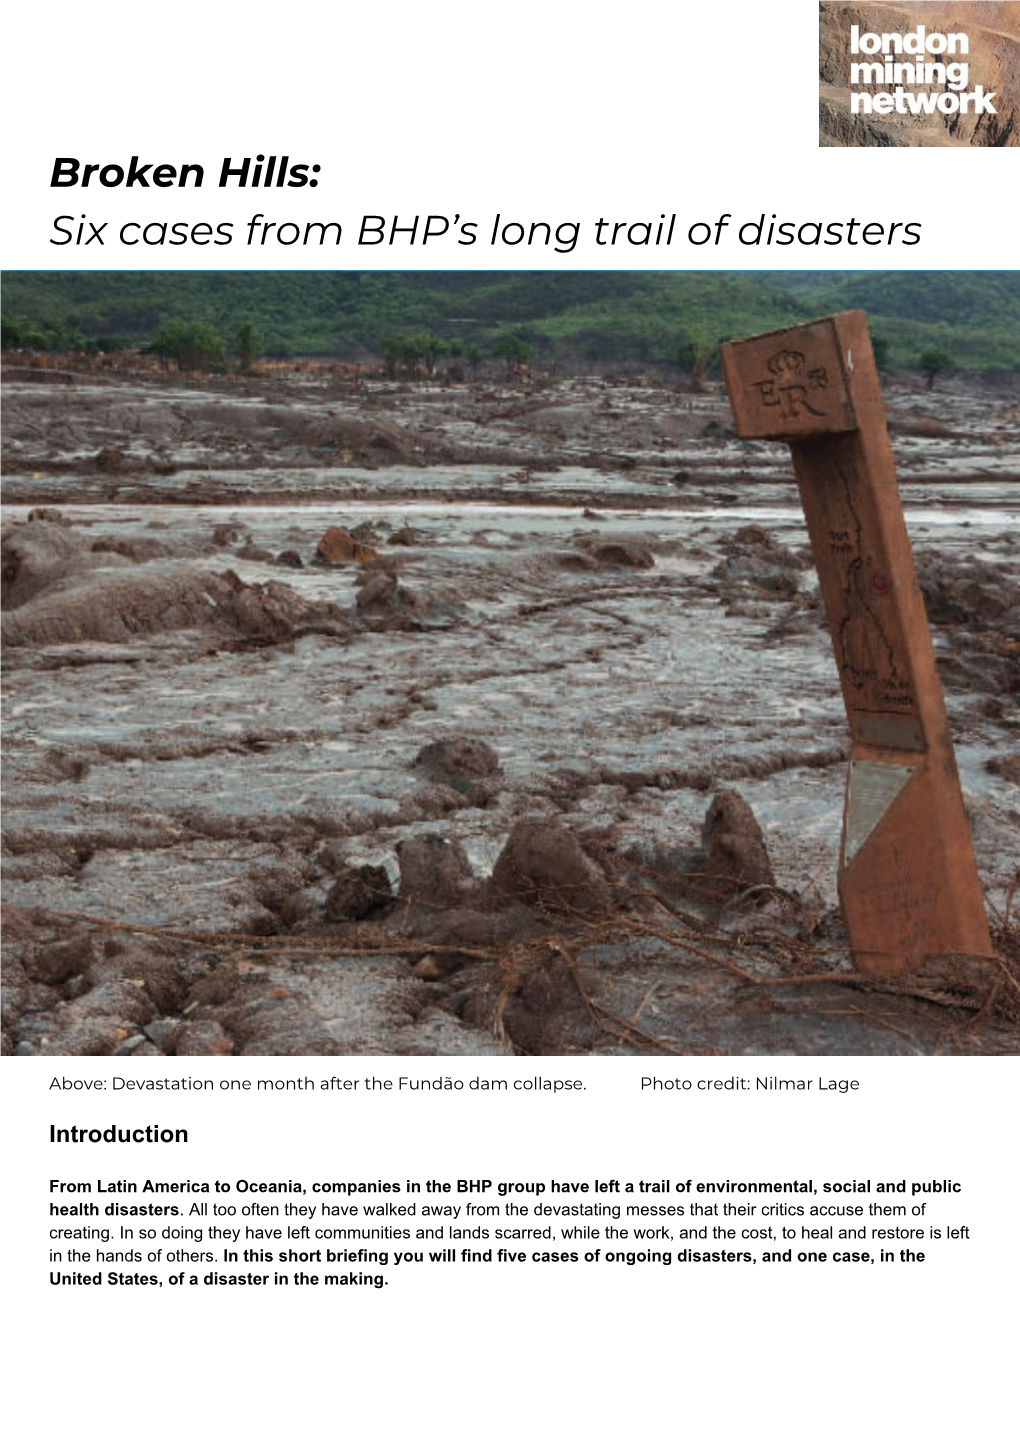 Broken Hills: Six Cases from BHP's Long Trail of Disasters